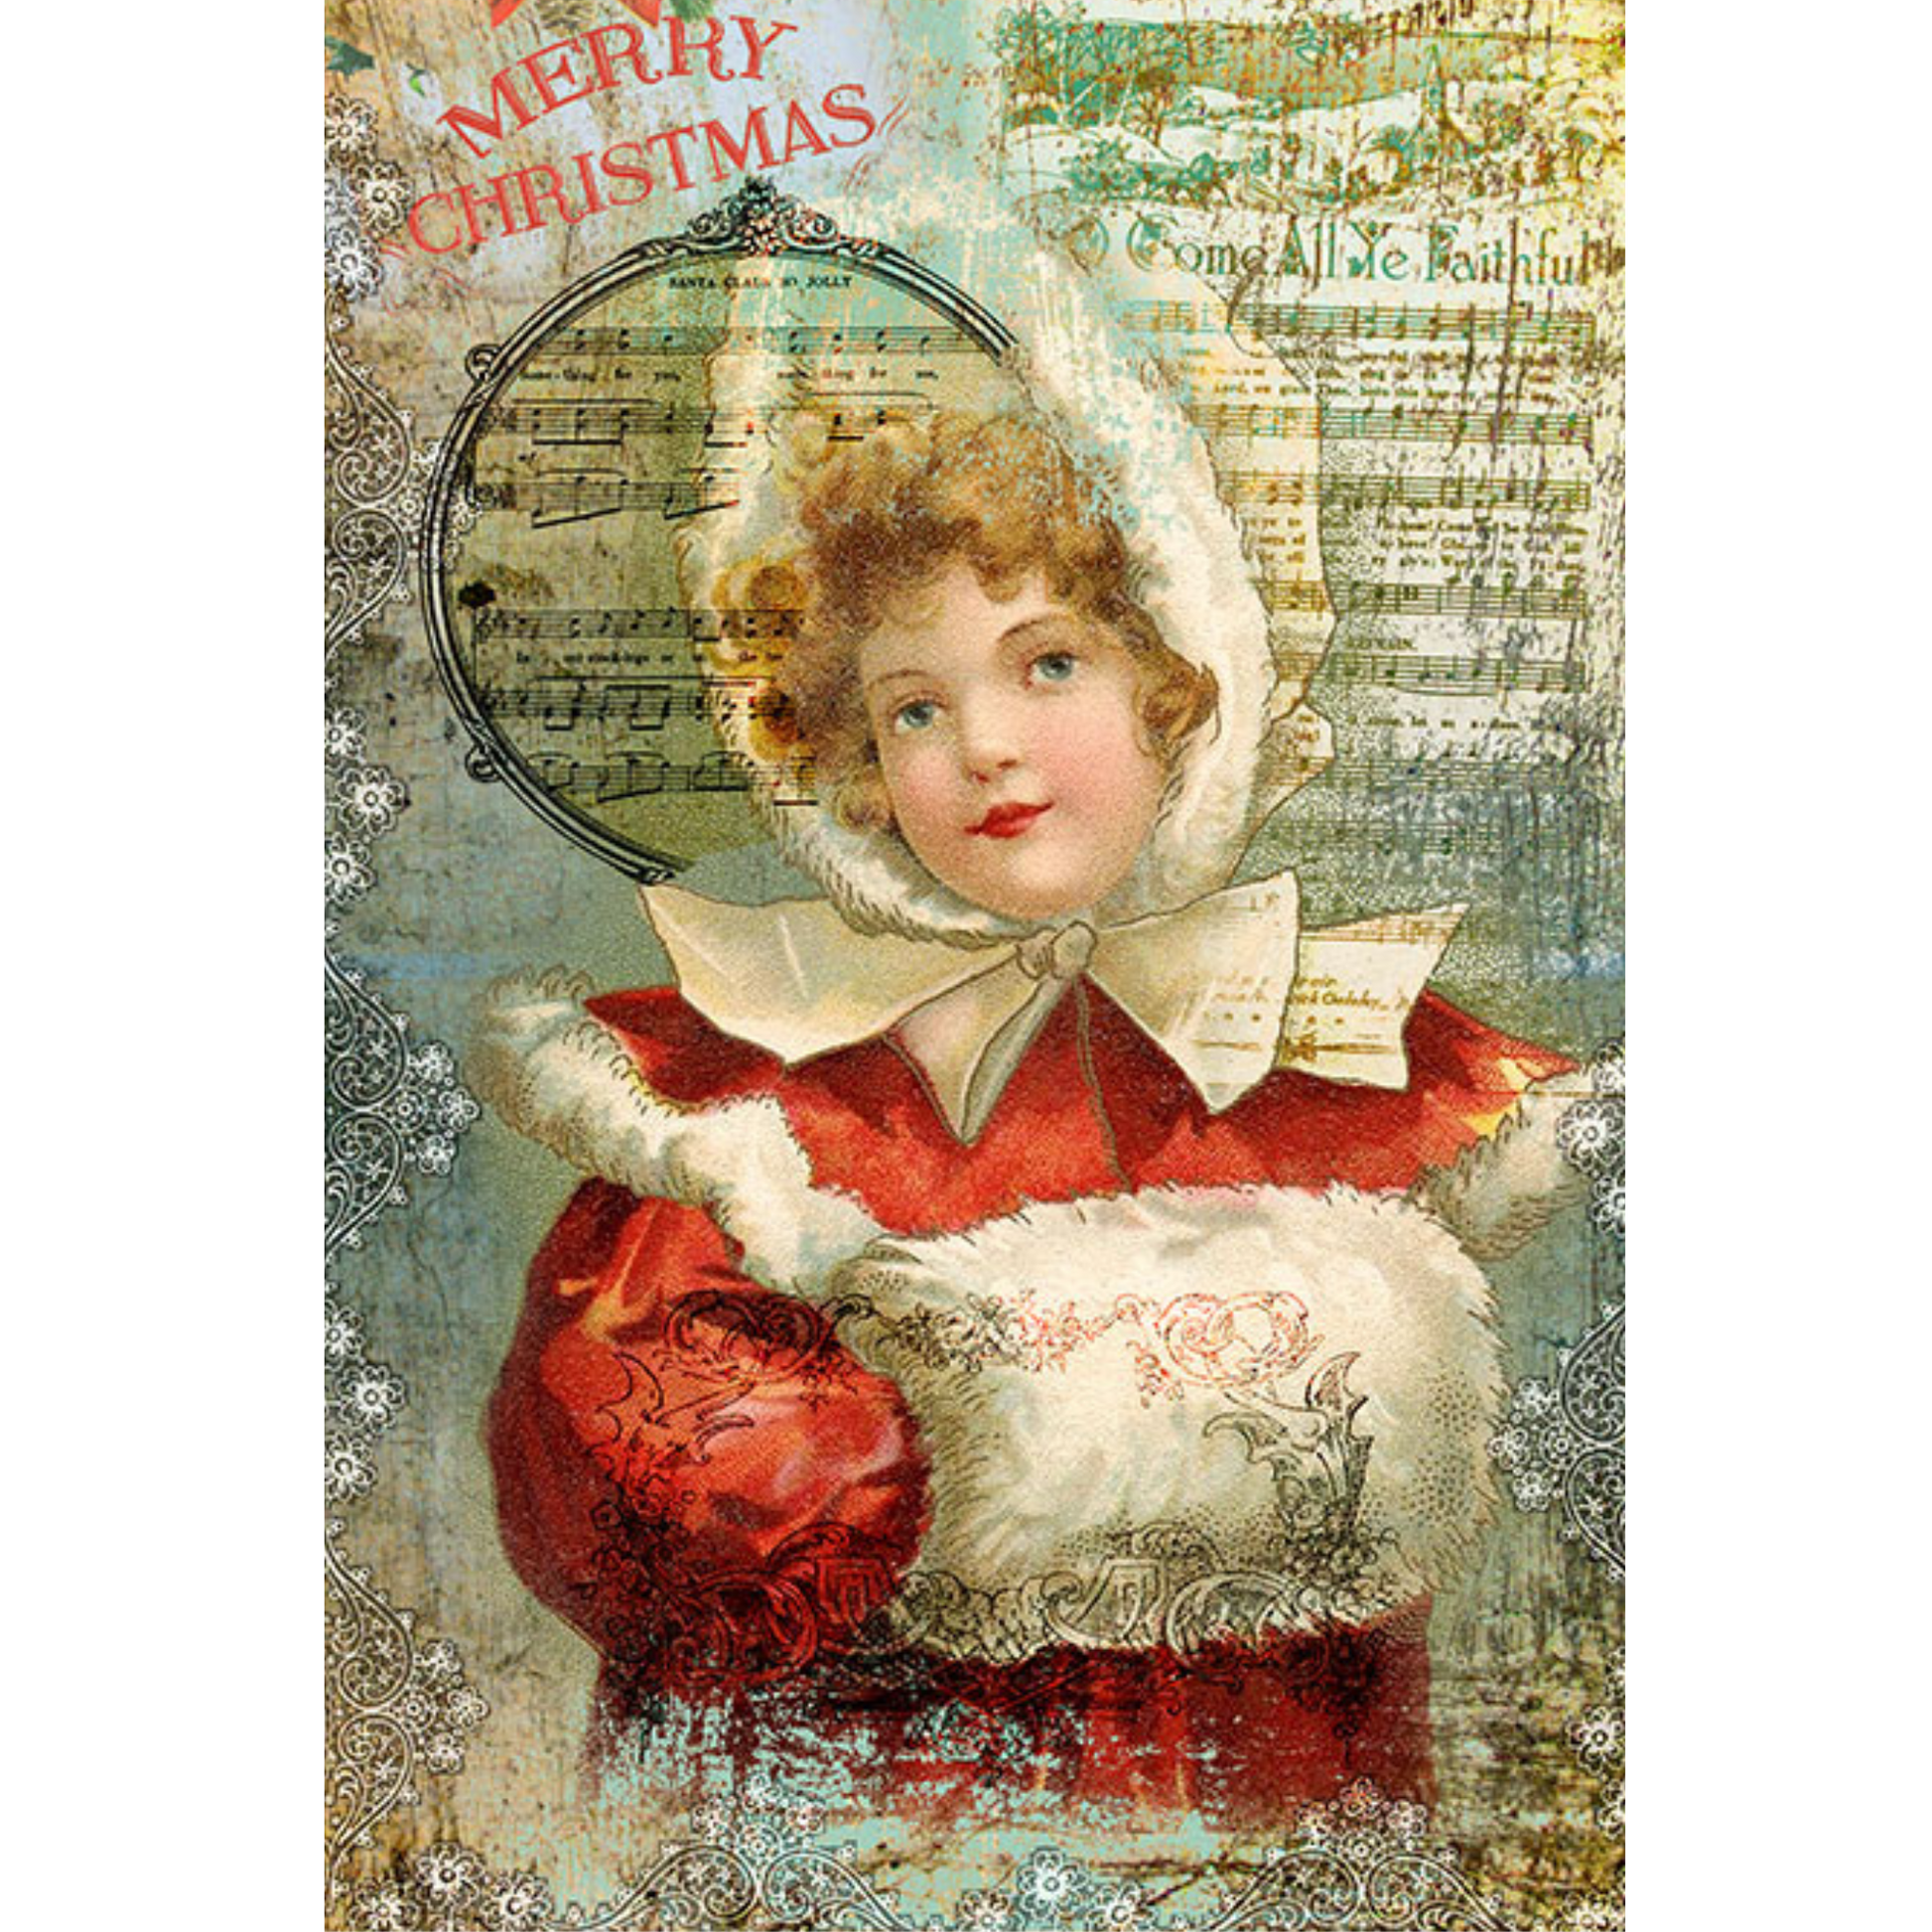 "Christmas-0339" Decoupage Rice Paper by Paper Designs. Size A4-8.3" x 11.7" available at Milton's Daughter